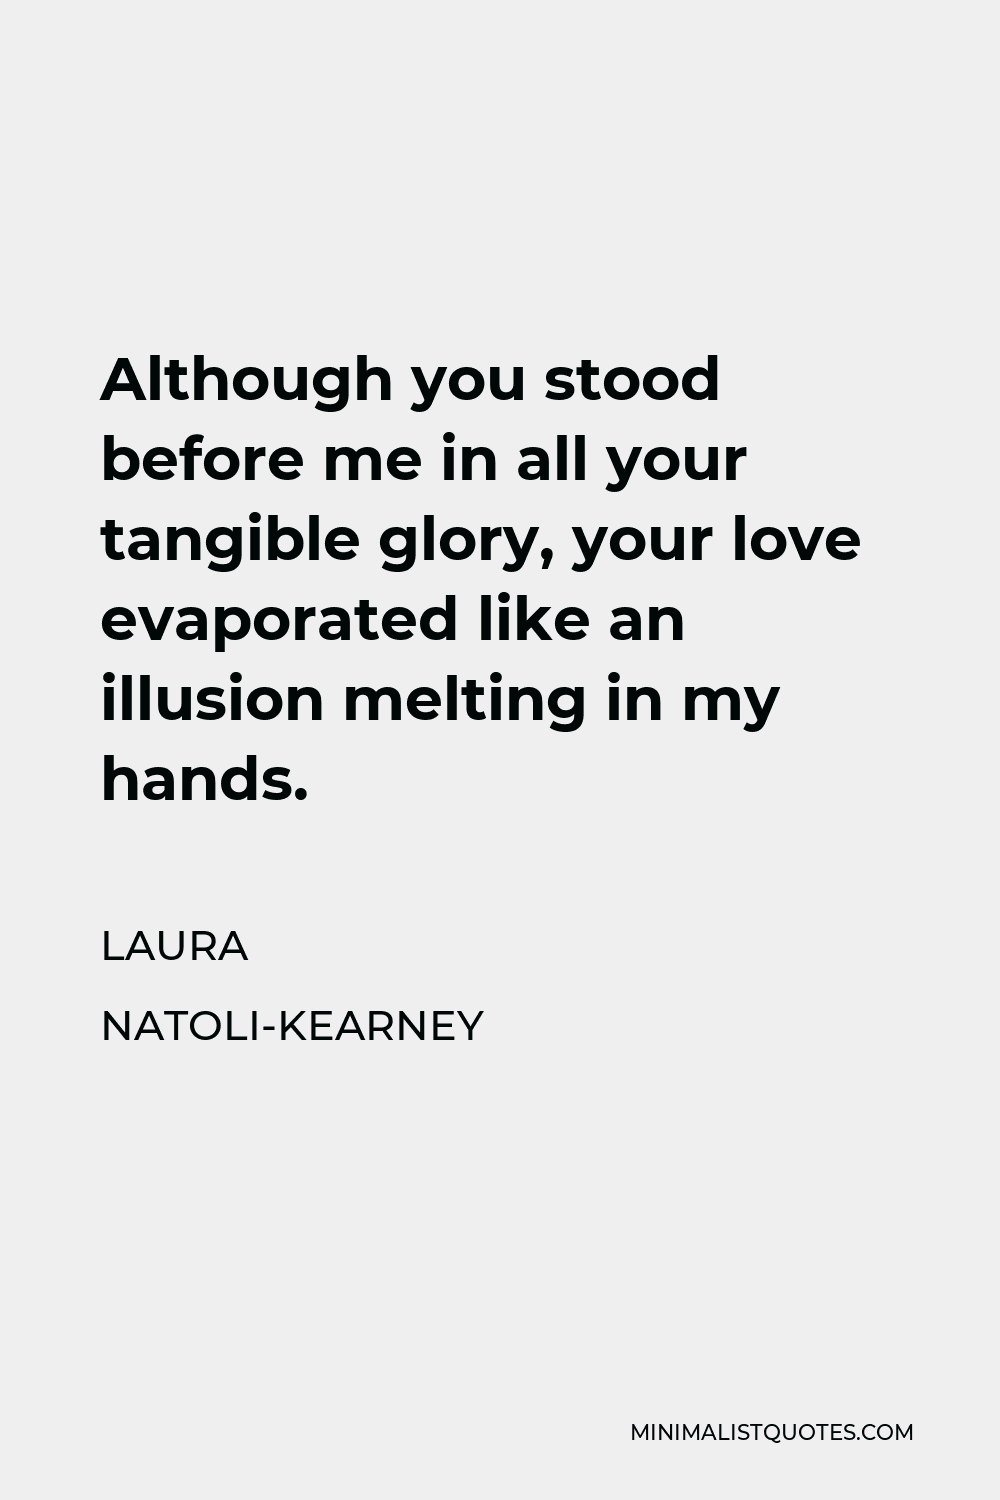 Laura Natoli-Kearney Quote - Although you stood before me in all your tangible glory, your love evaporated like an illusion melting in my hands.